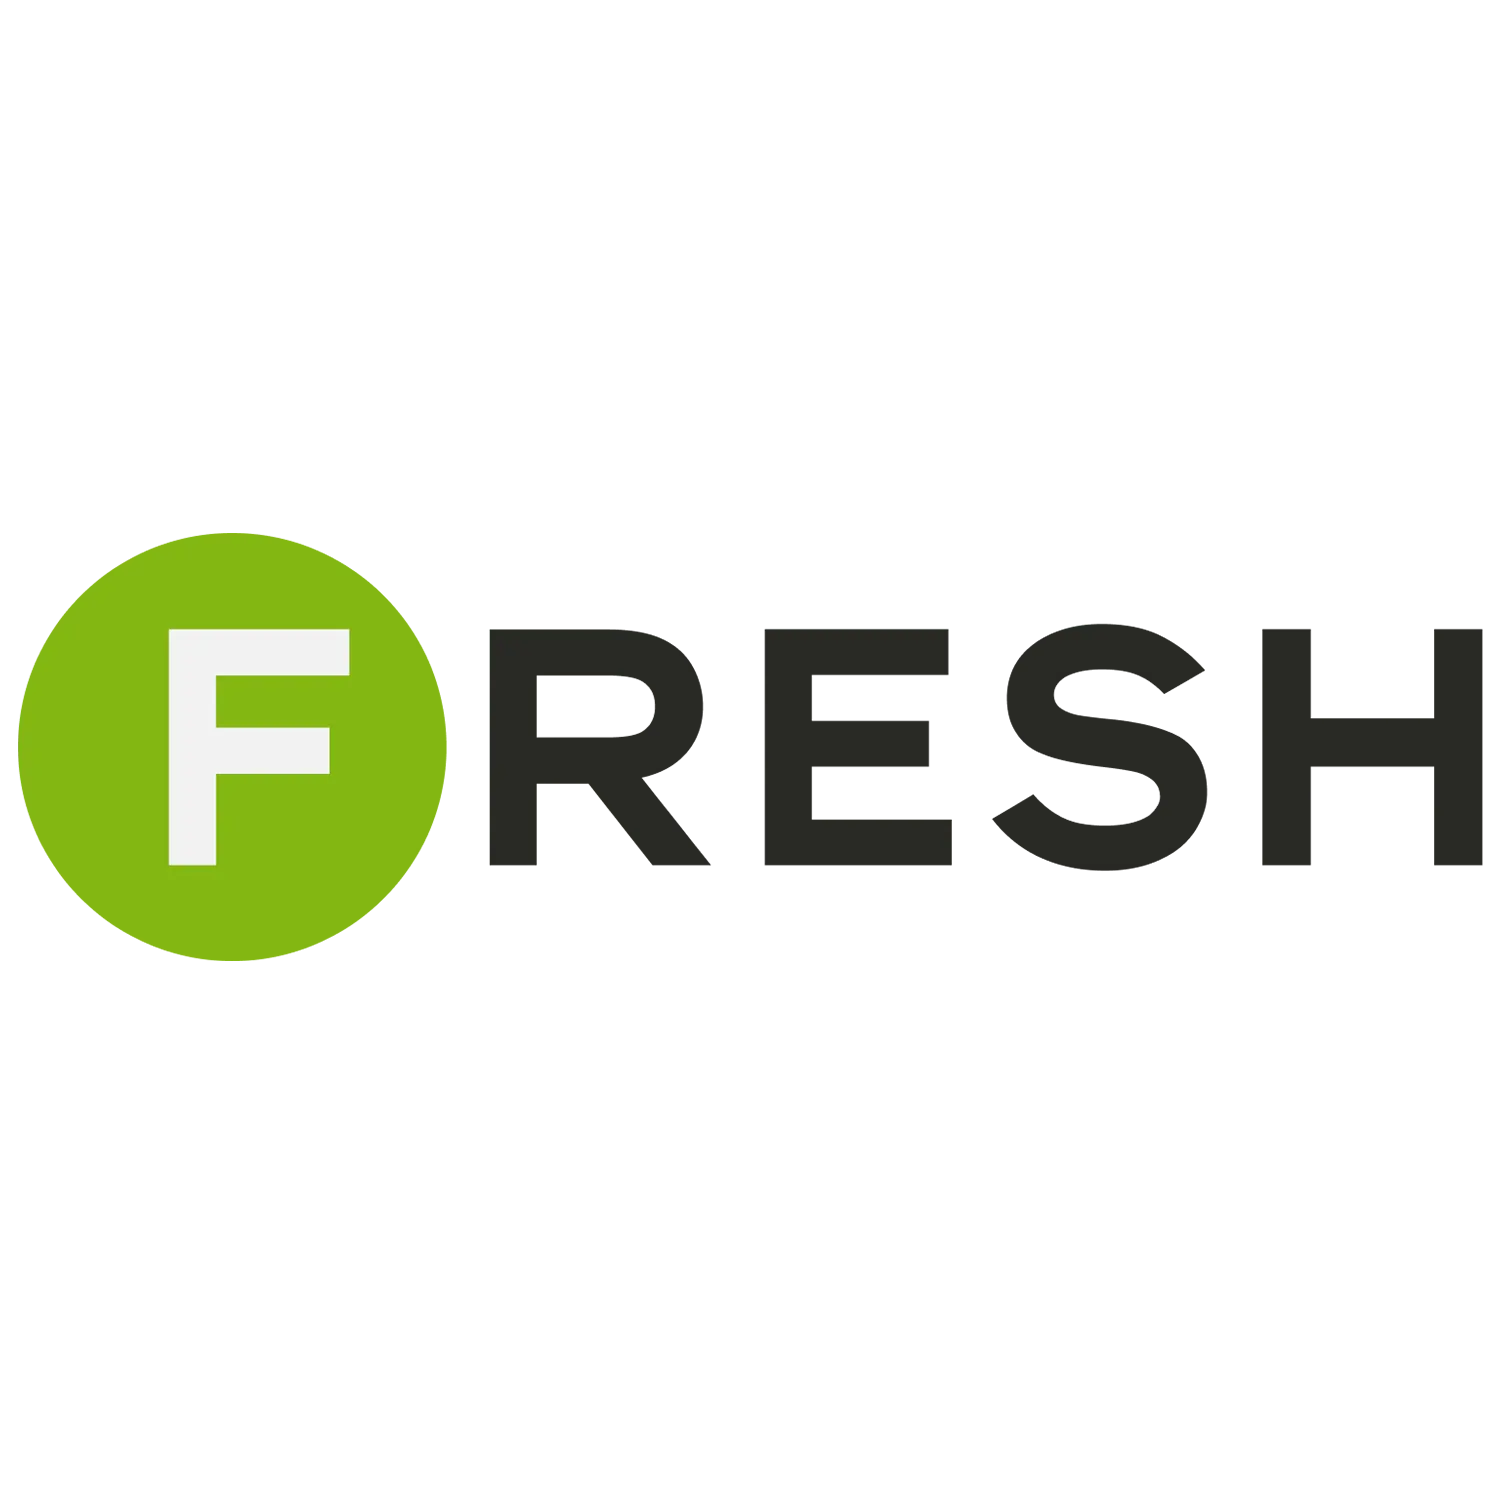 Fresh Casino is a great place for making bets and playing casino games.